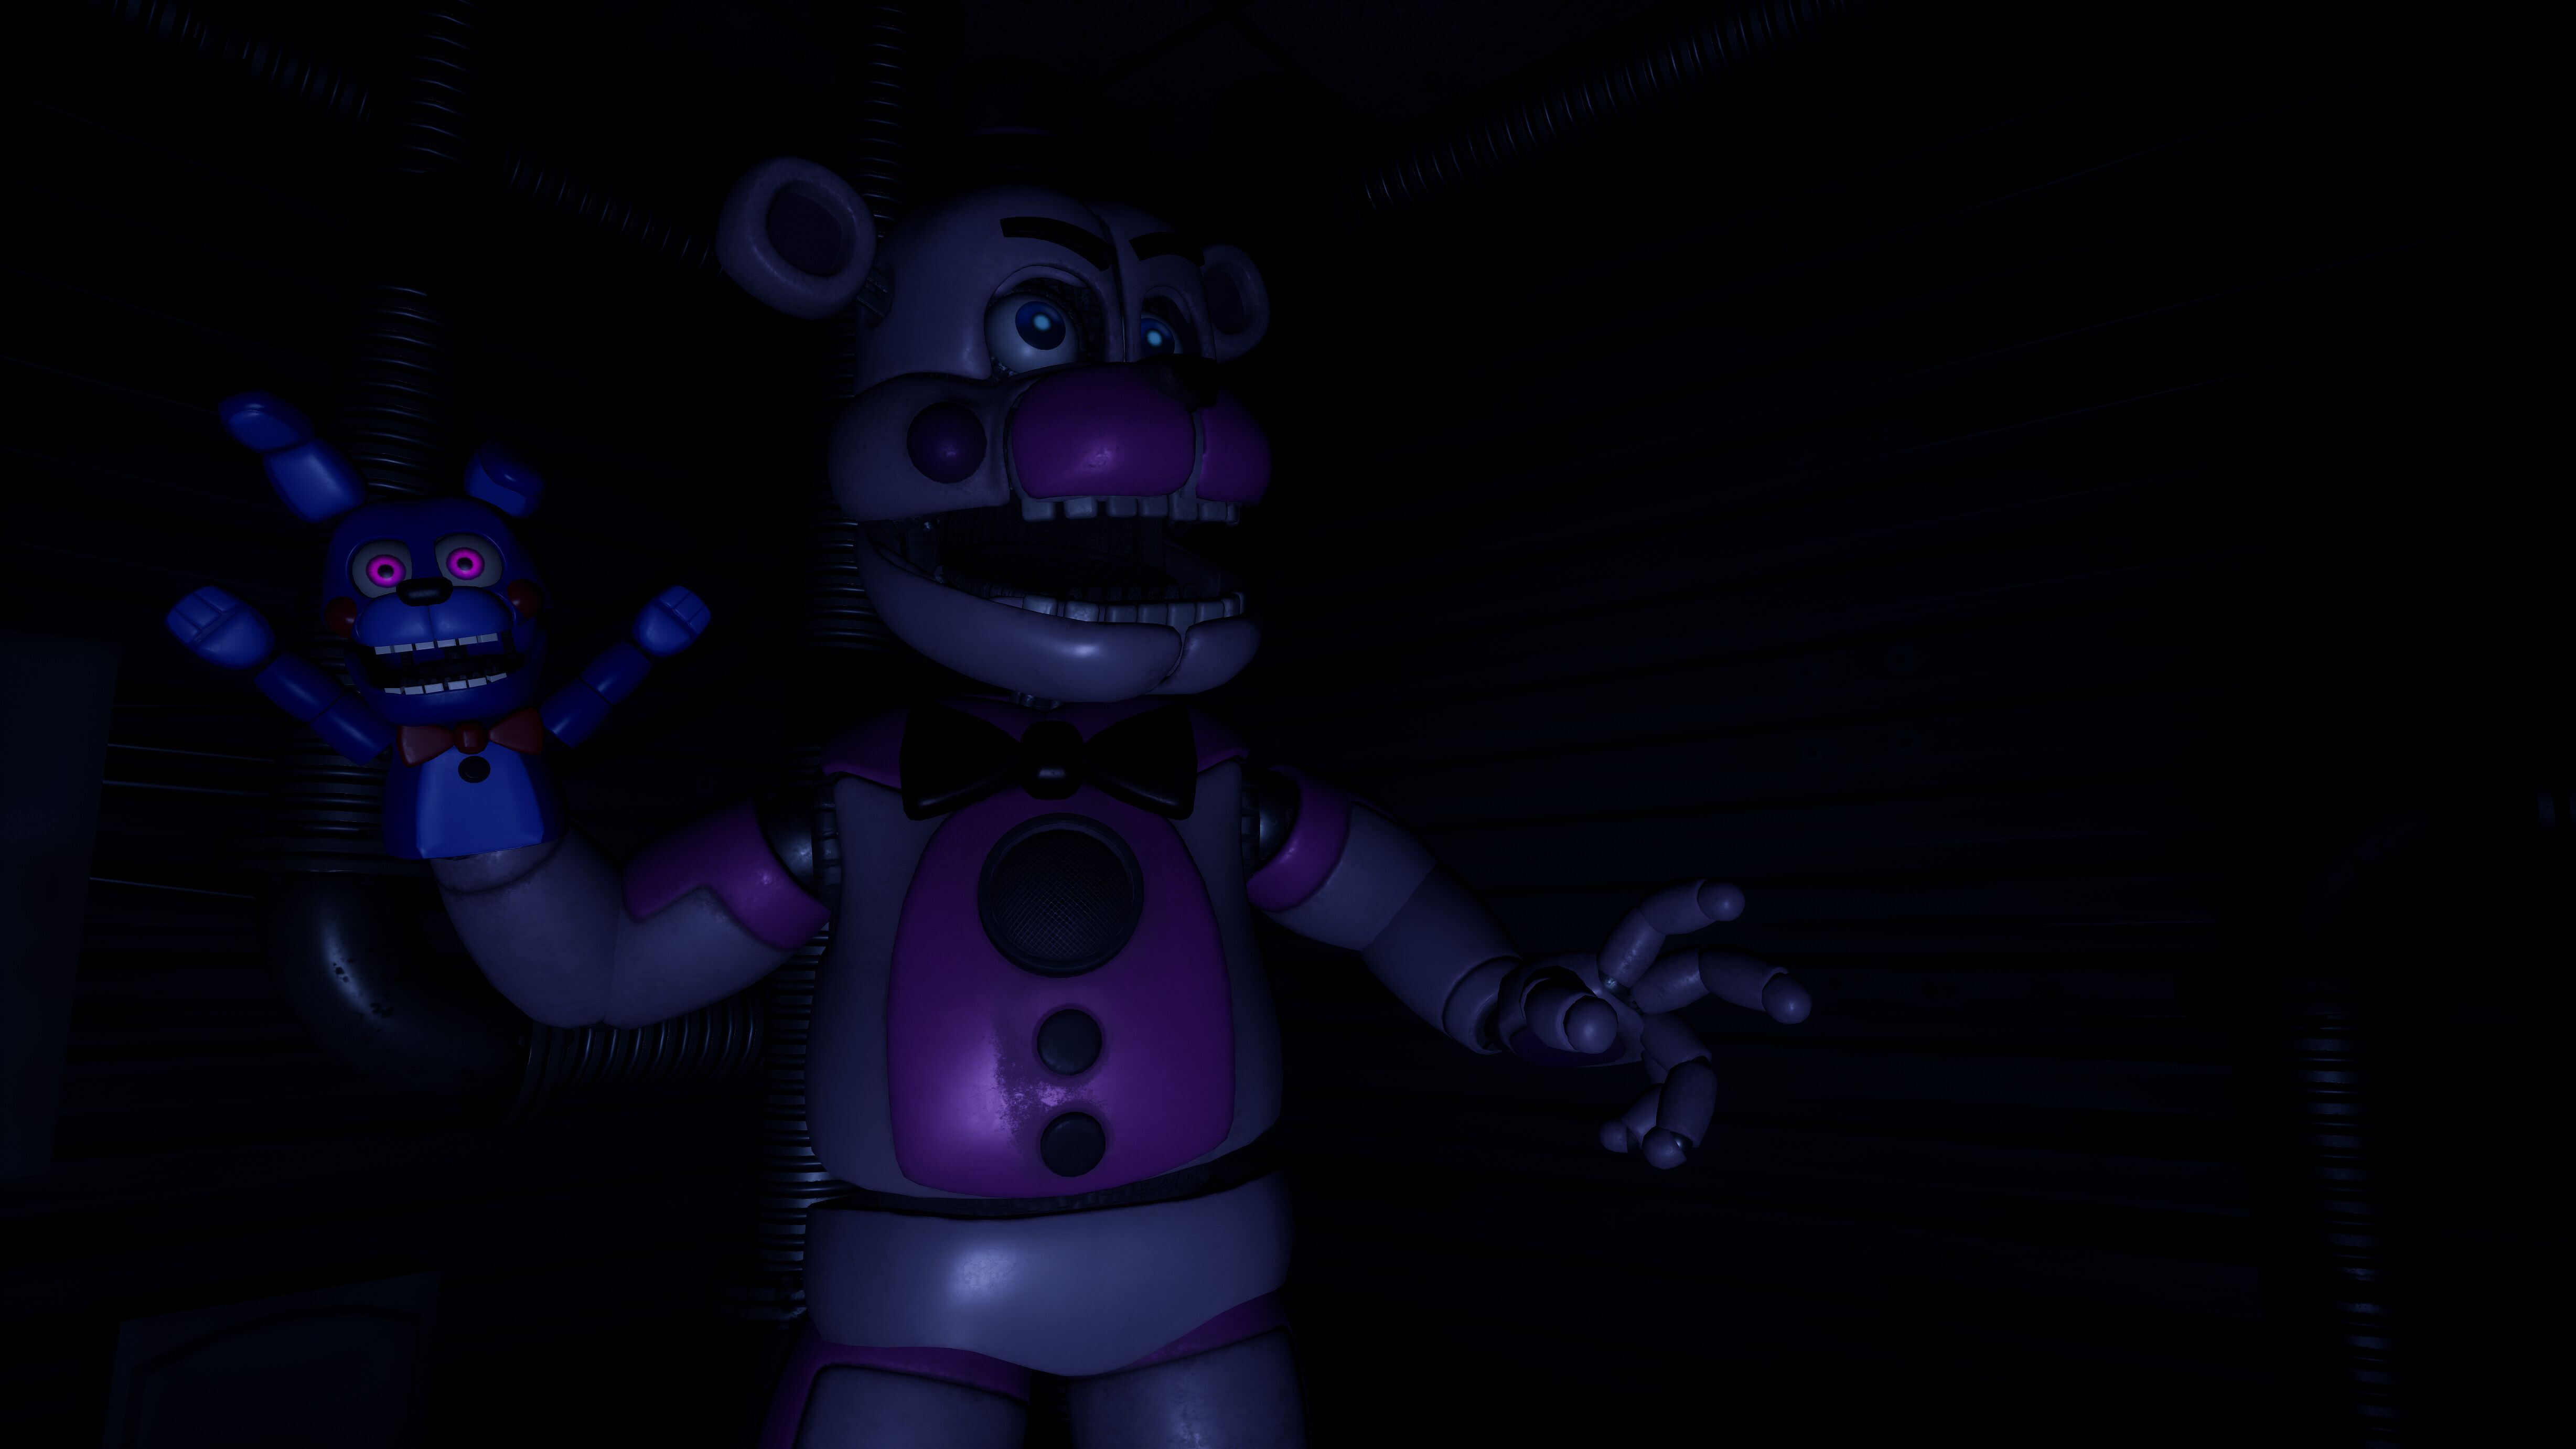 Five Nights at Freddy's: Help Wanted 2